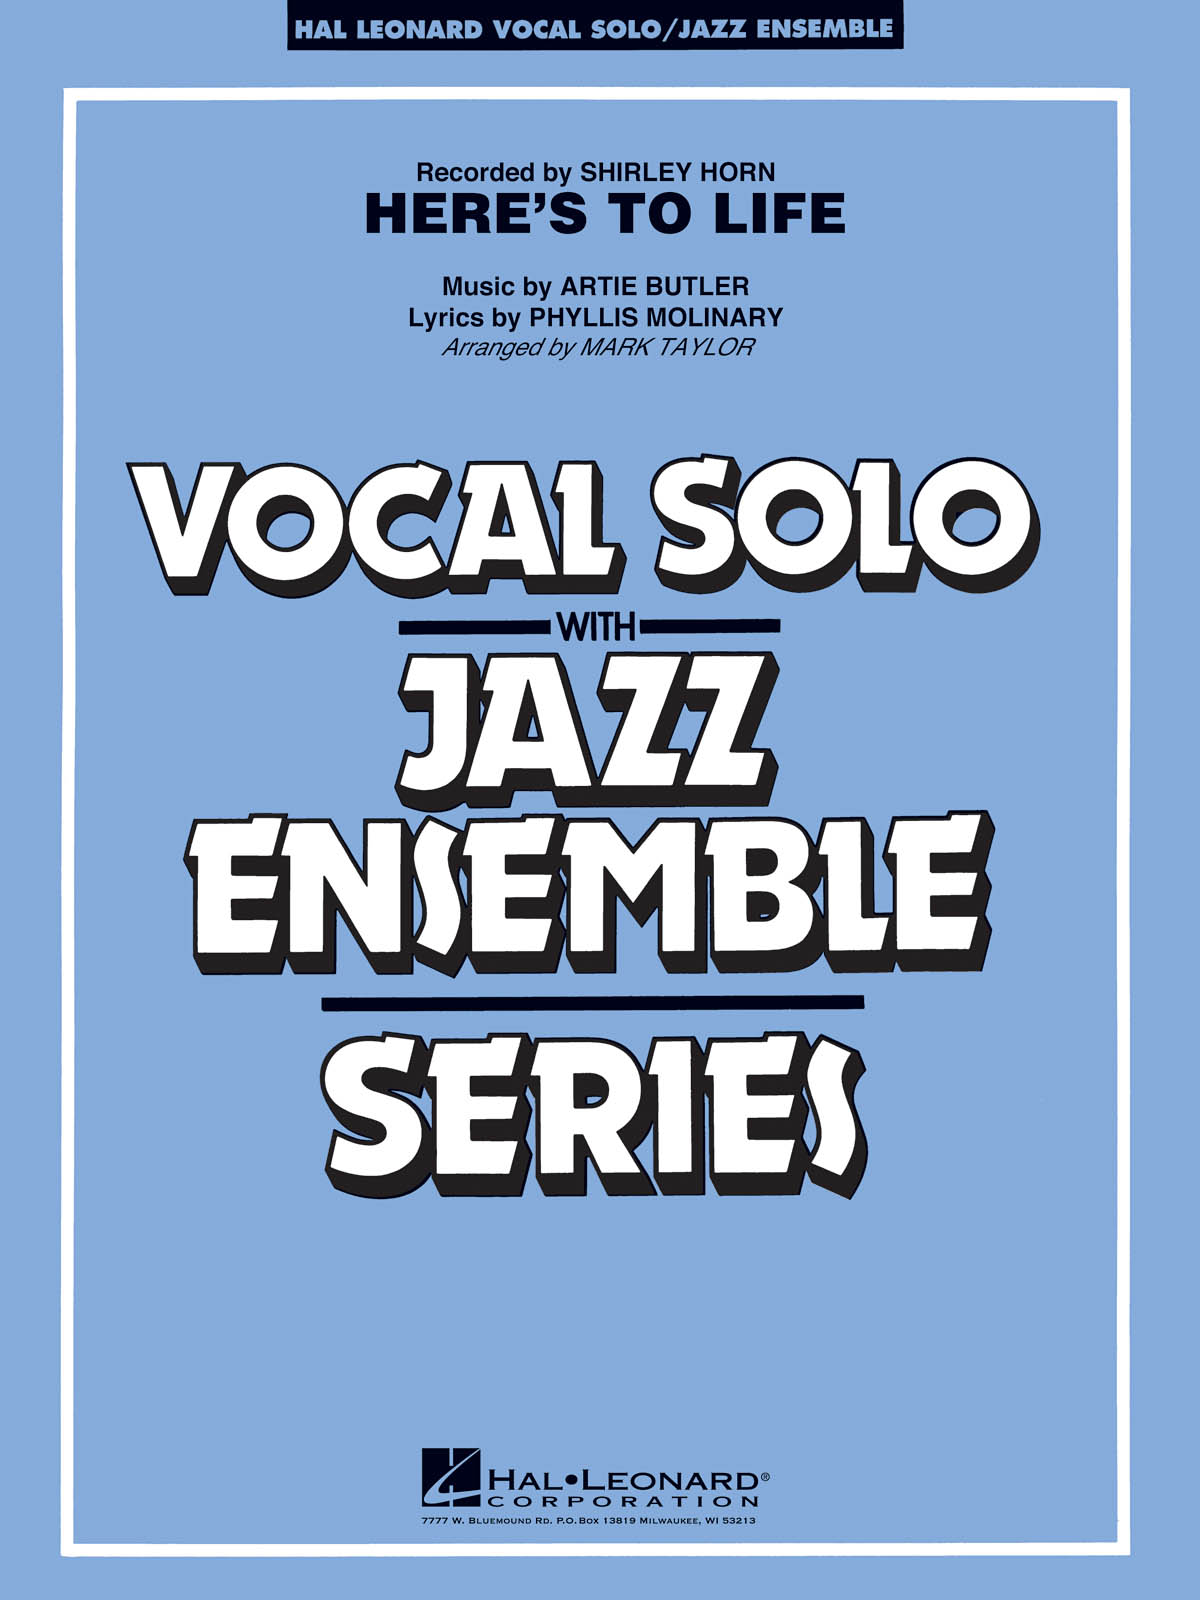 HAL LEONARD BUTLER ARTIE - HERE'S TO LIFE - VOCAL SOLO / JAZZ ENSEMBLE SERIES 